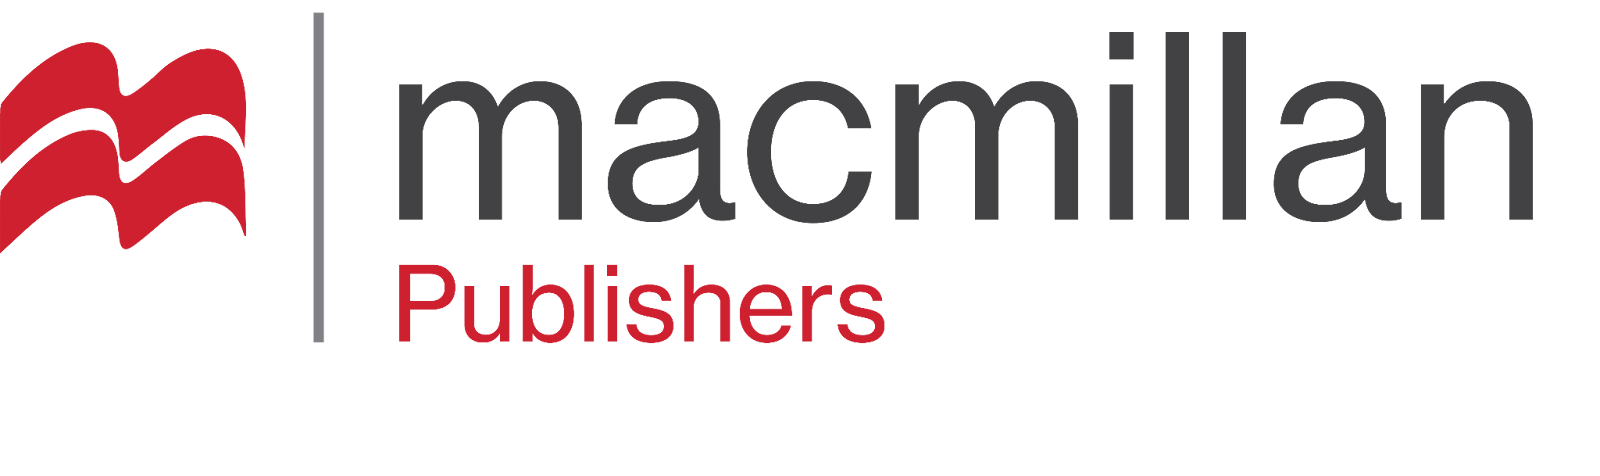 Macmillan Publishers logo with black and red type and a red sweep on the left